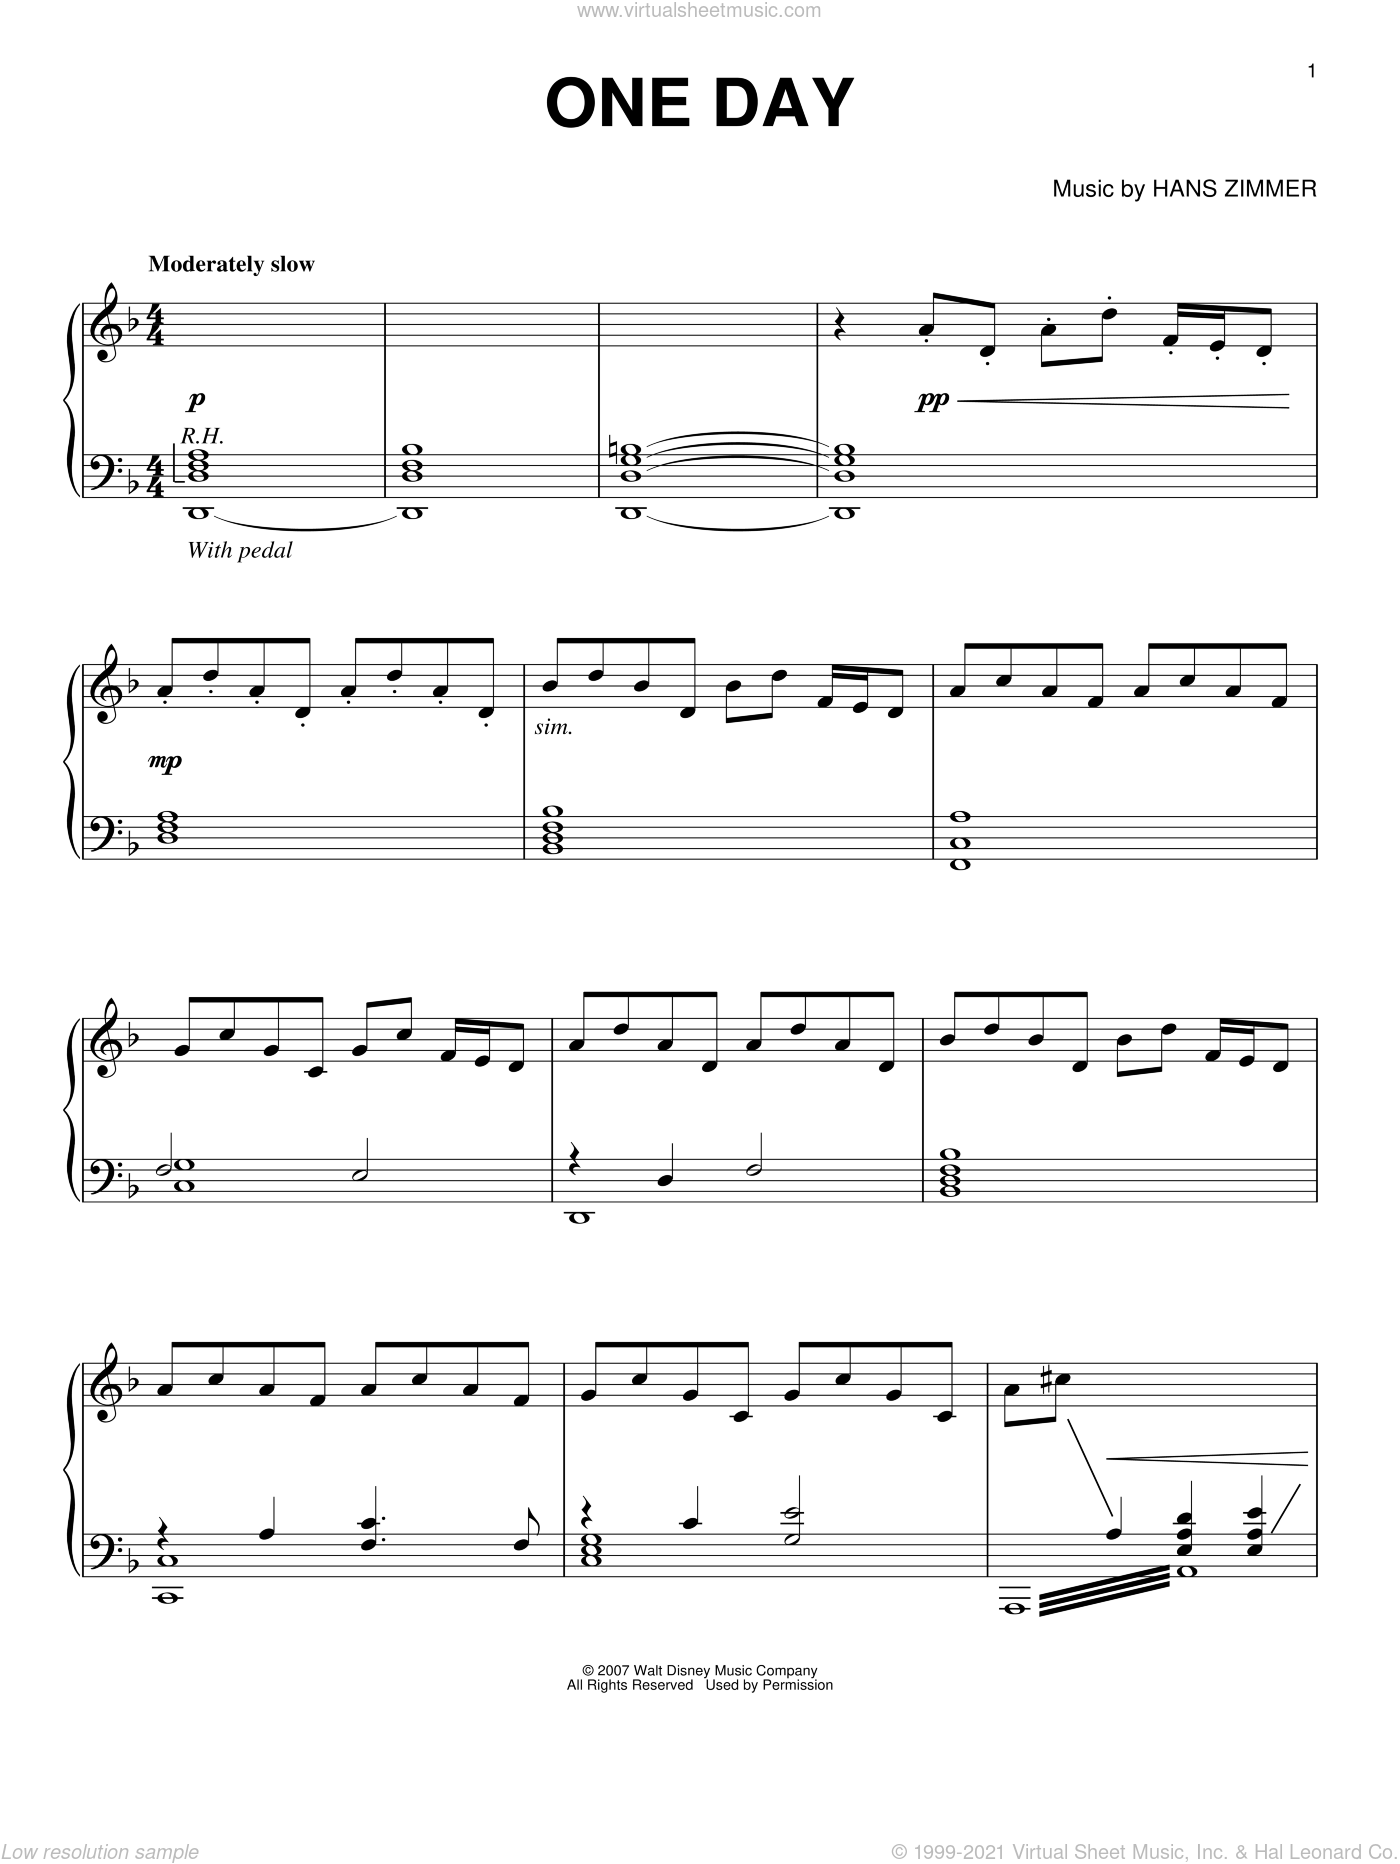 Zimmer - One Day sheet music for piano solo [PDF-interactive]